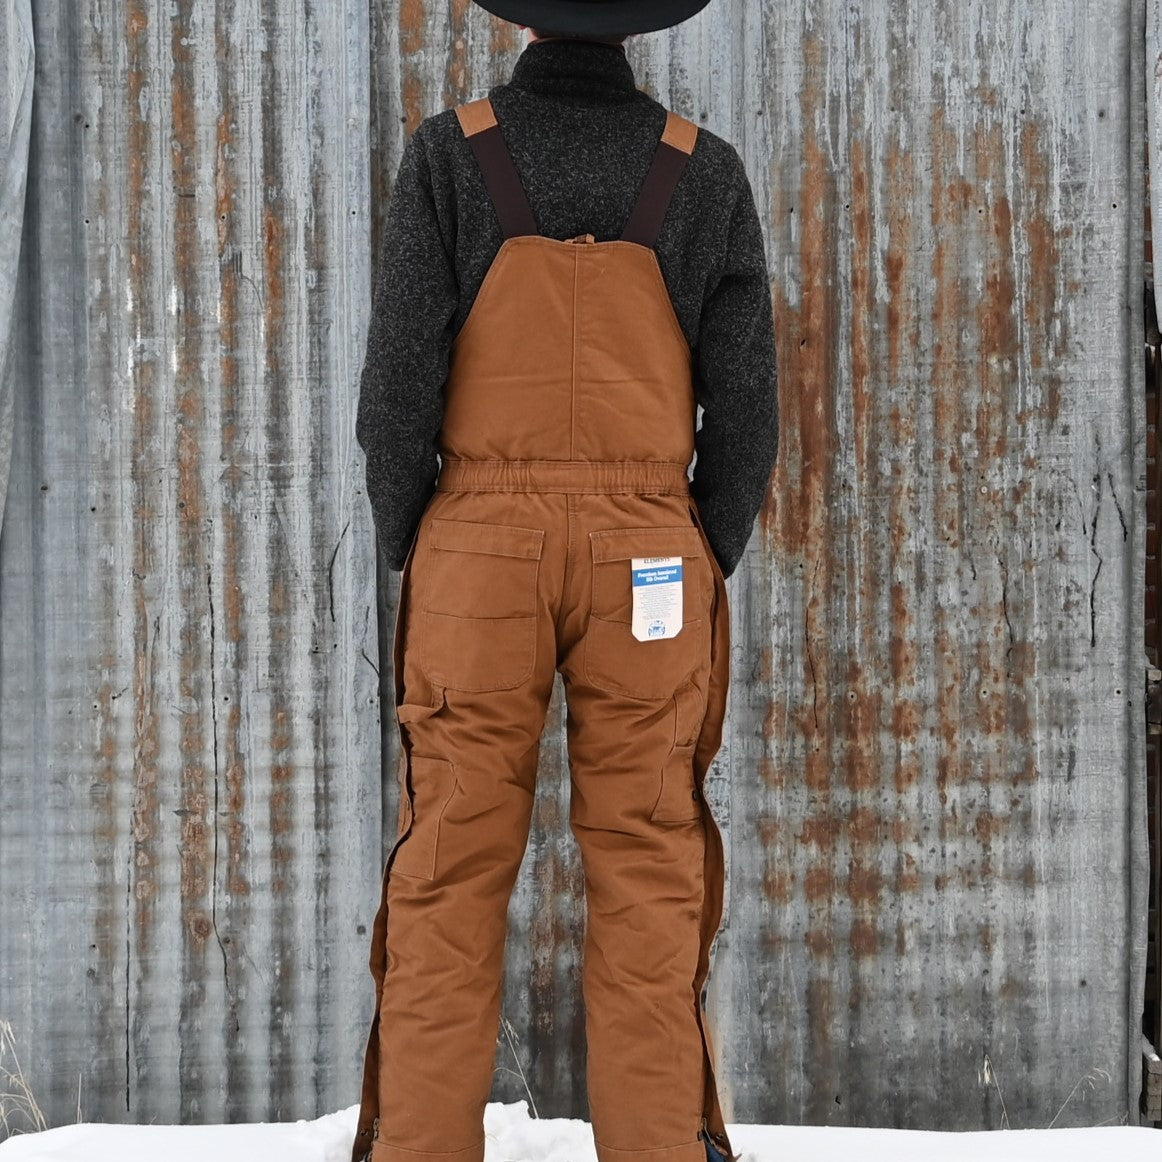 Key Ind Insulated Bib Overall in Saddle view of back